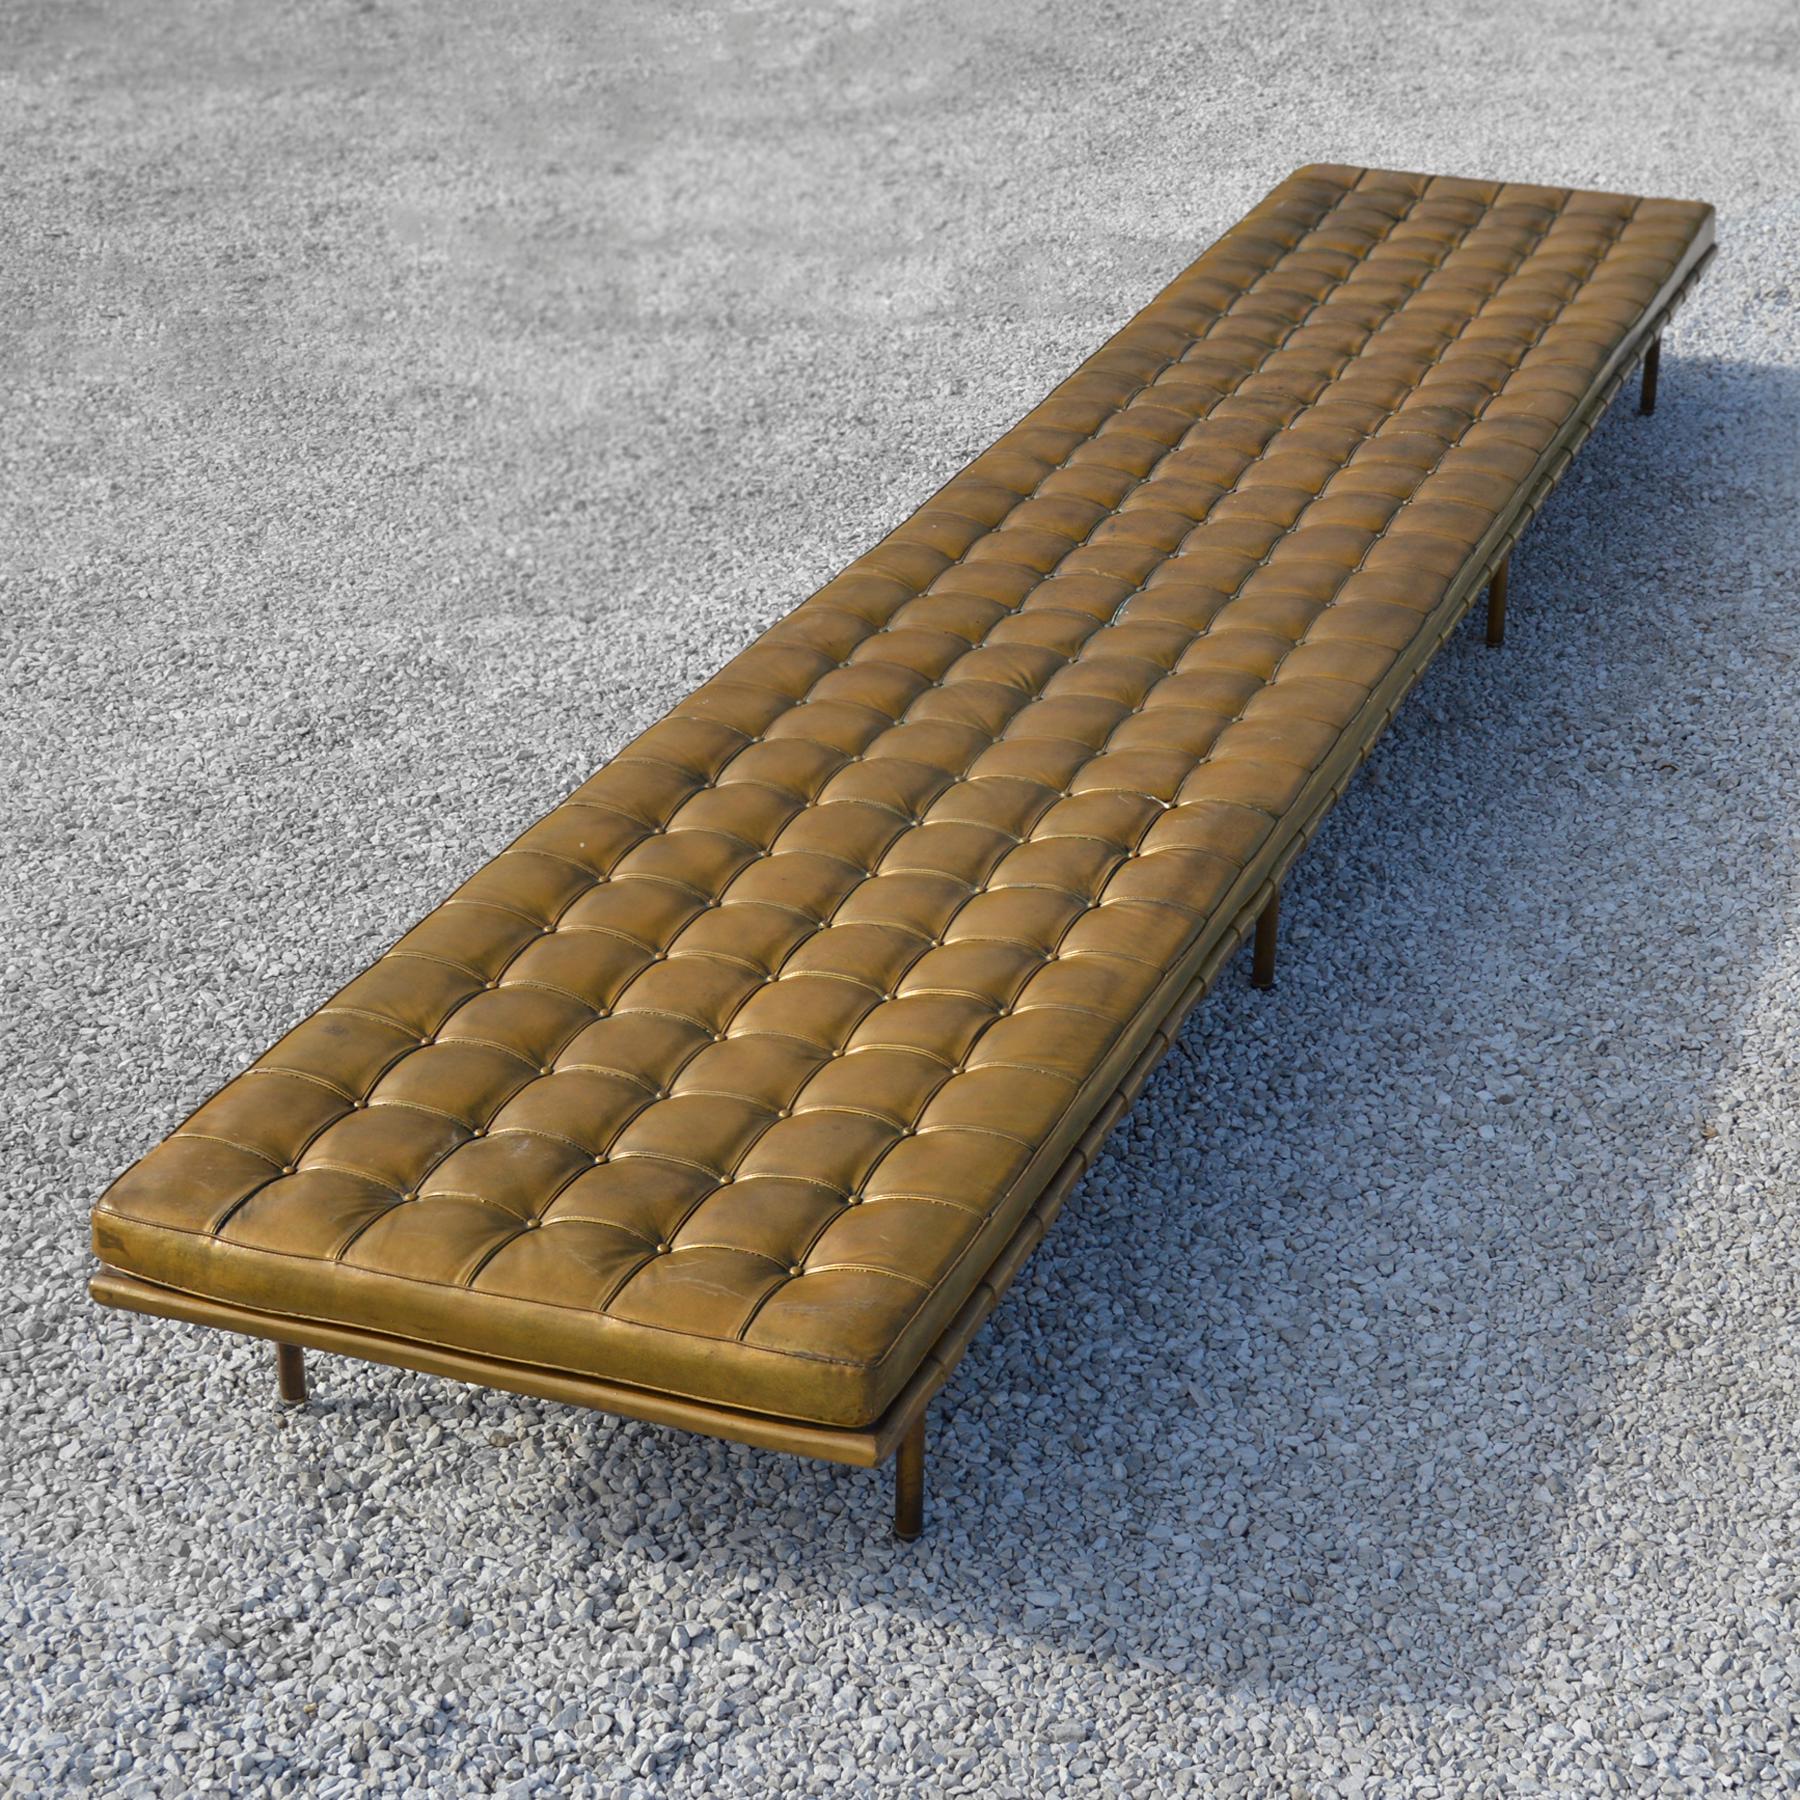 Here is an extraordinarily rare piece with fantastic provenance– this oversize version of Mies van der Rohe’s Barcelona daybed is 16 feet in length and custom fabricated of fiberglass and steel. You would not know that it is fiberglass without